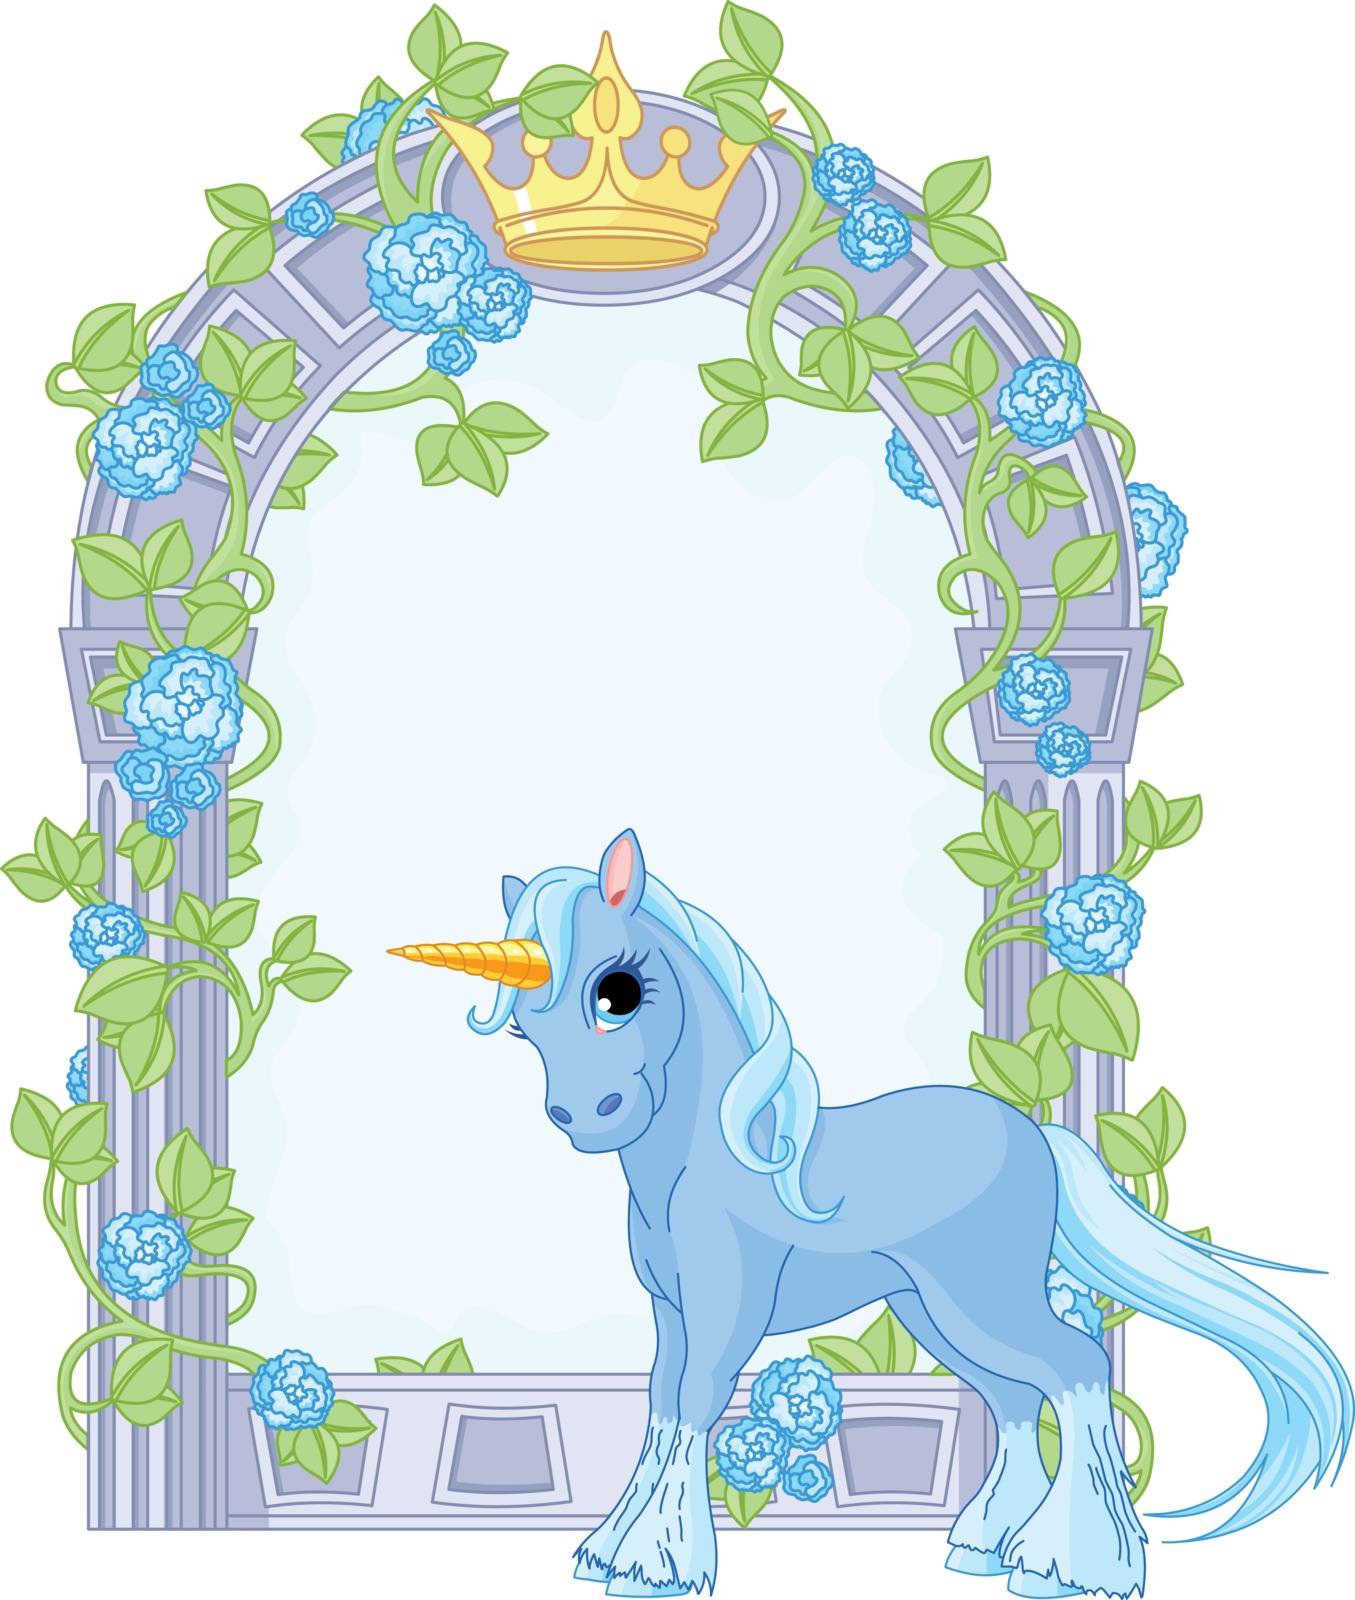 Illustration of standing beautiful cute unicorn close to flower frame